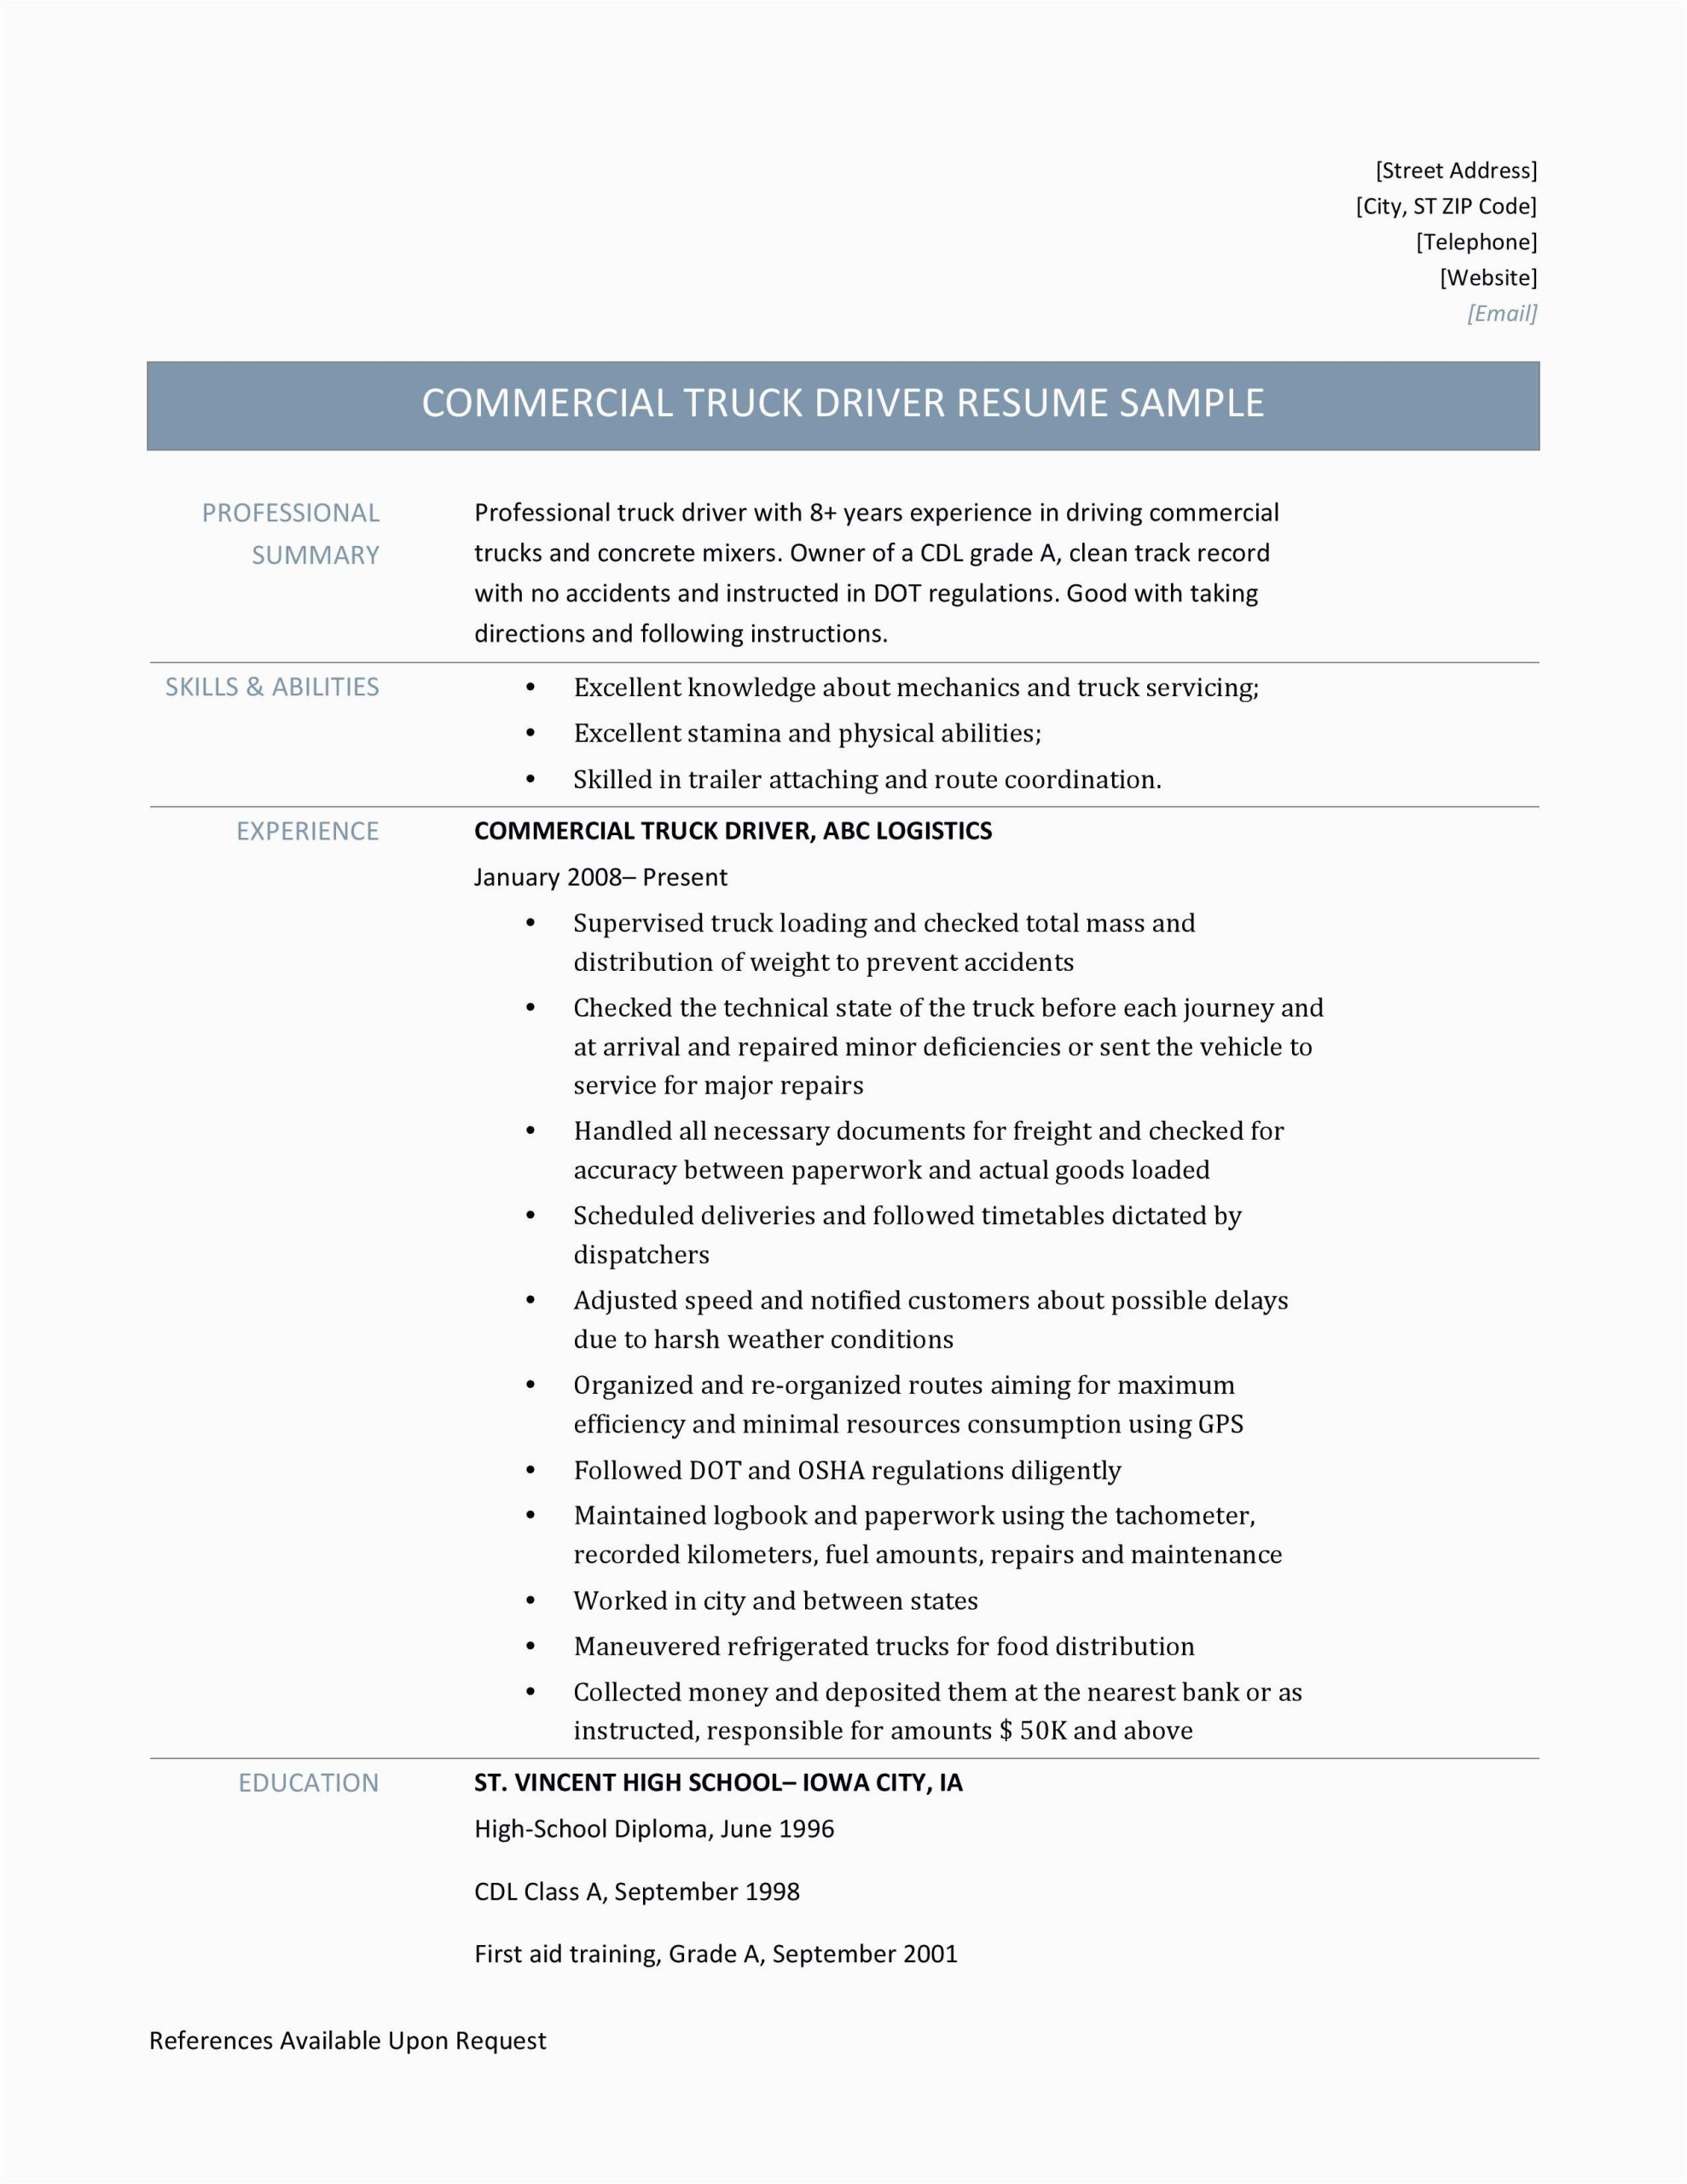 Resume Sample for A Commercail Driver Mercial Truck Driver Resume Template 2017